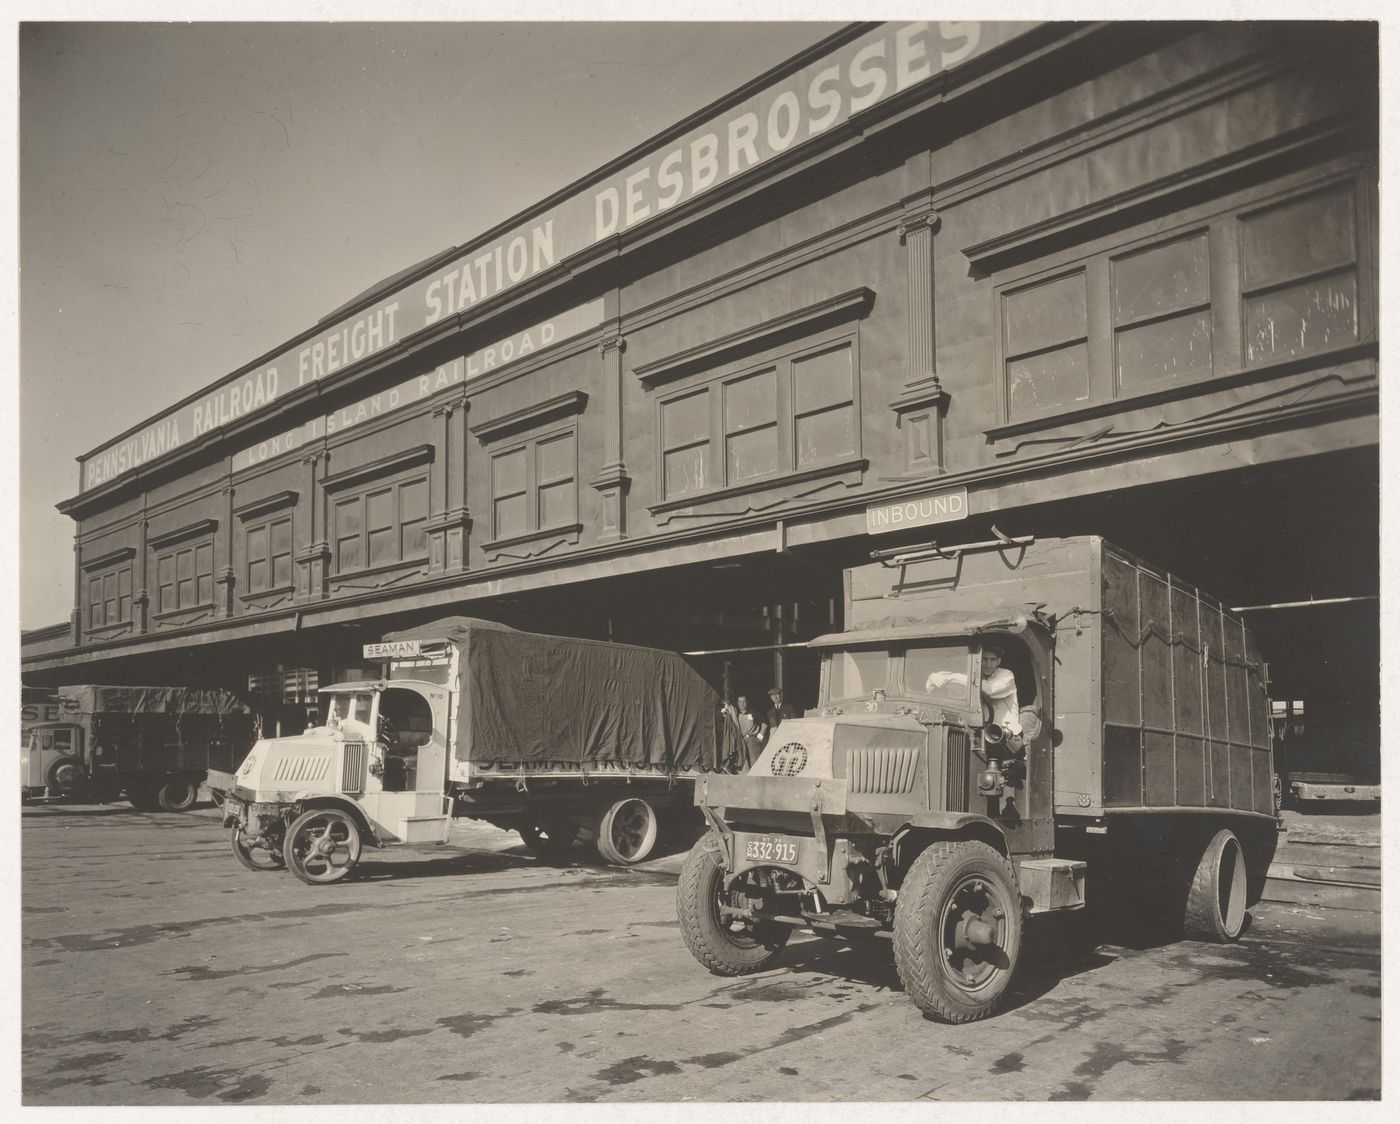 Intersection of West and Desbrosses streets with parked trucks, New York City, New York